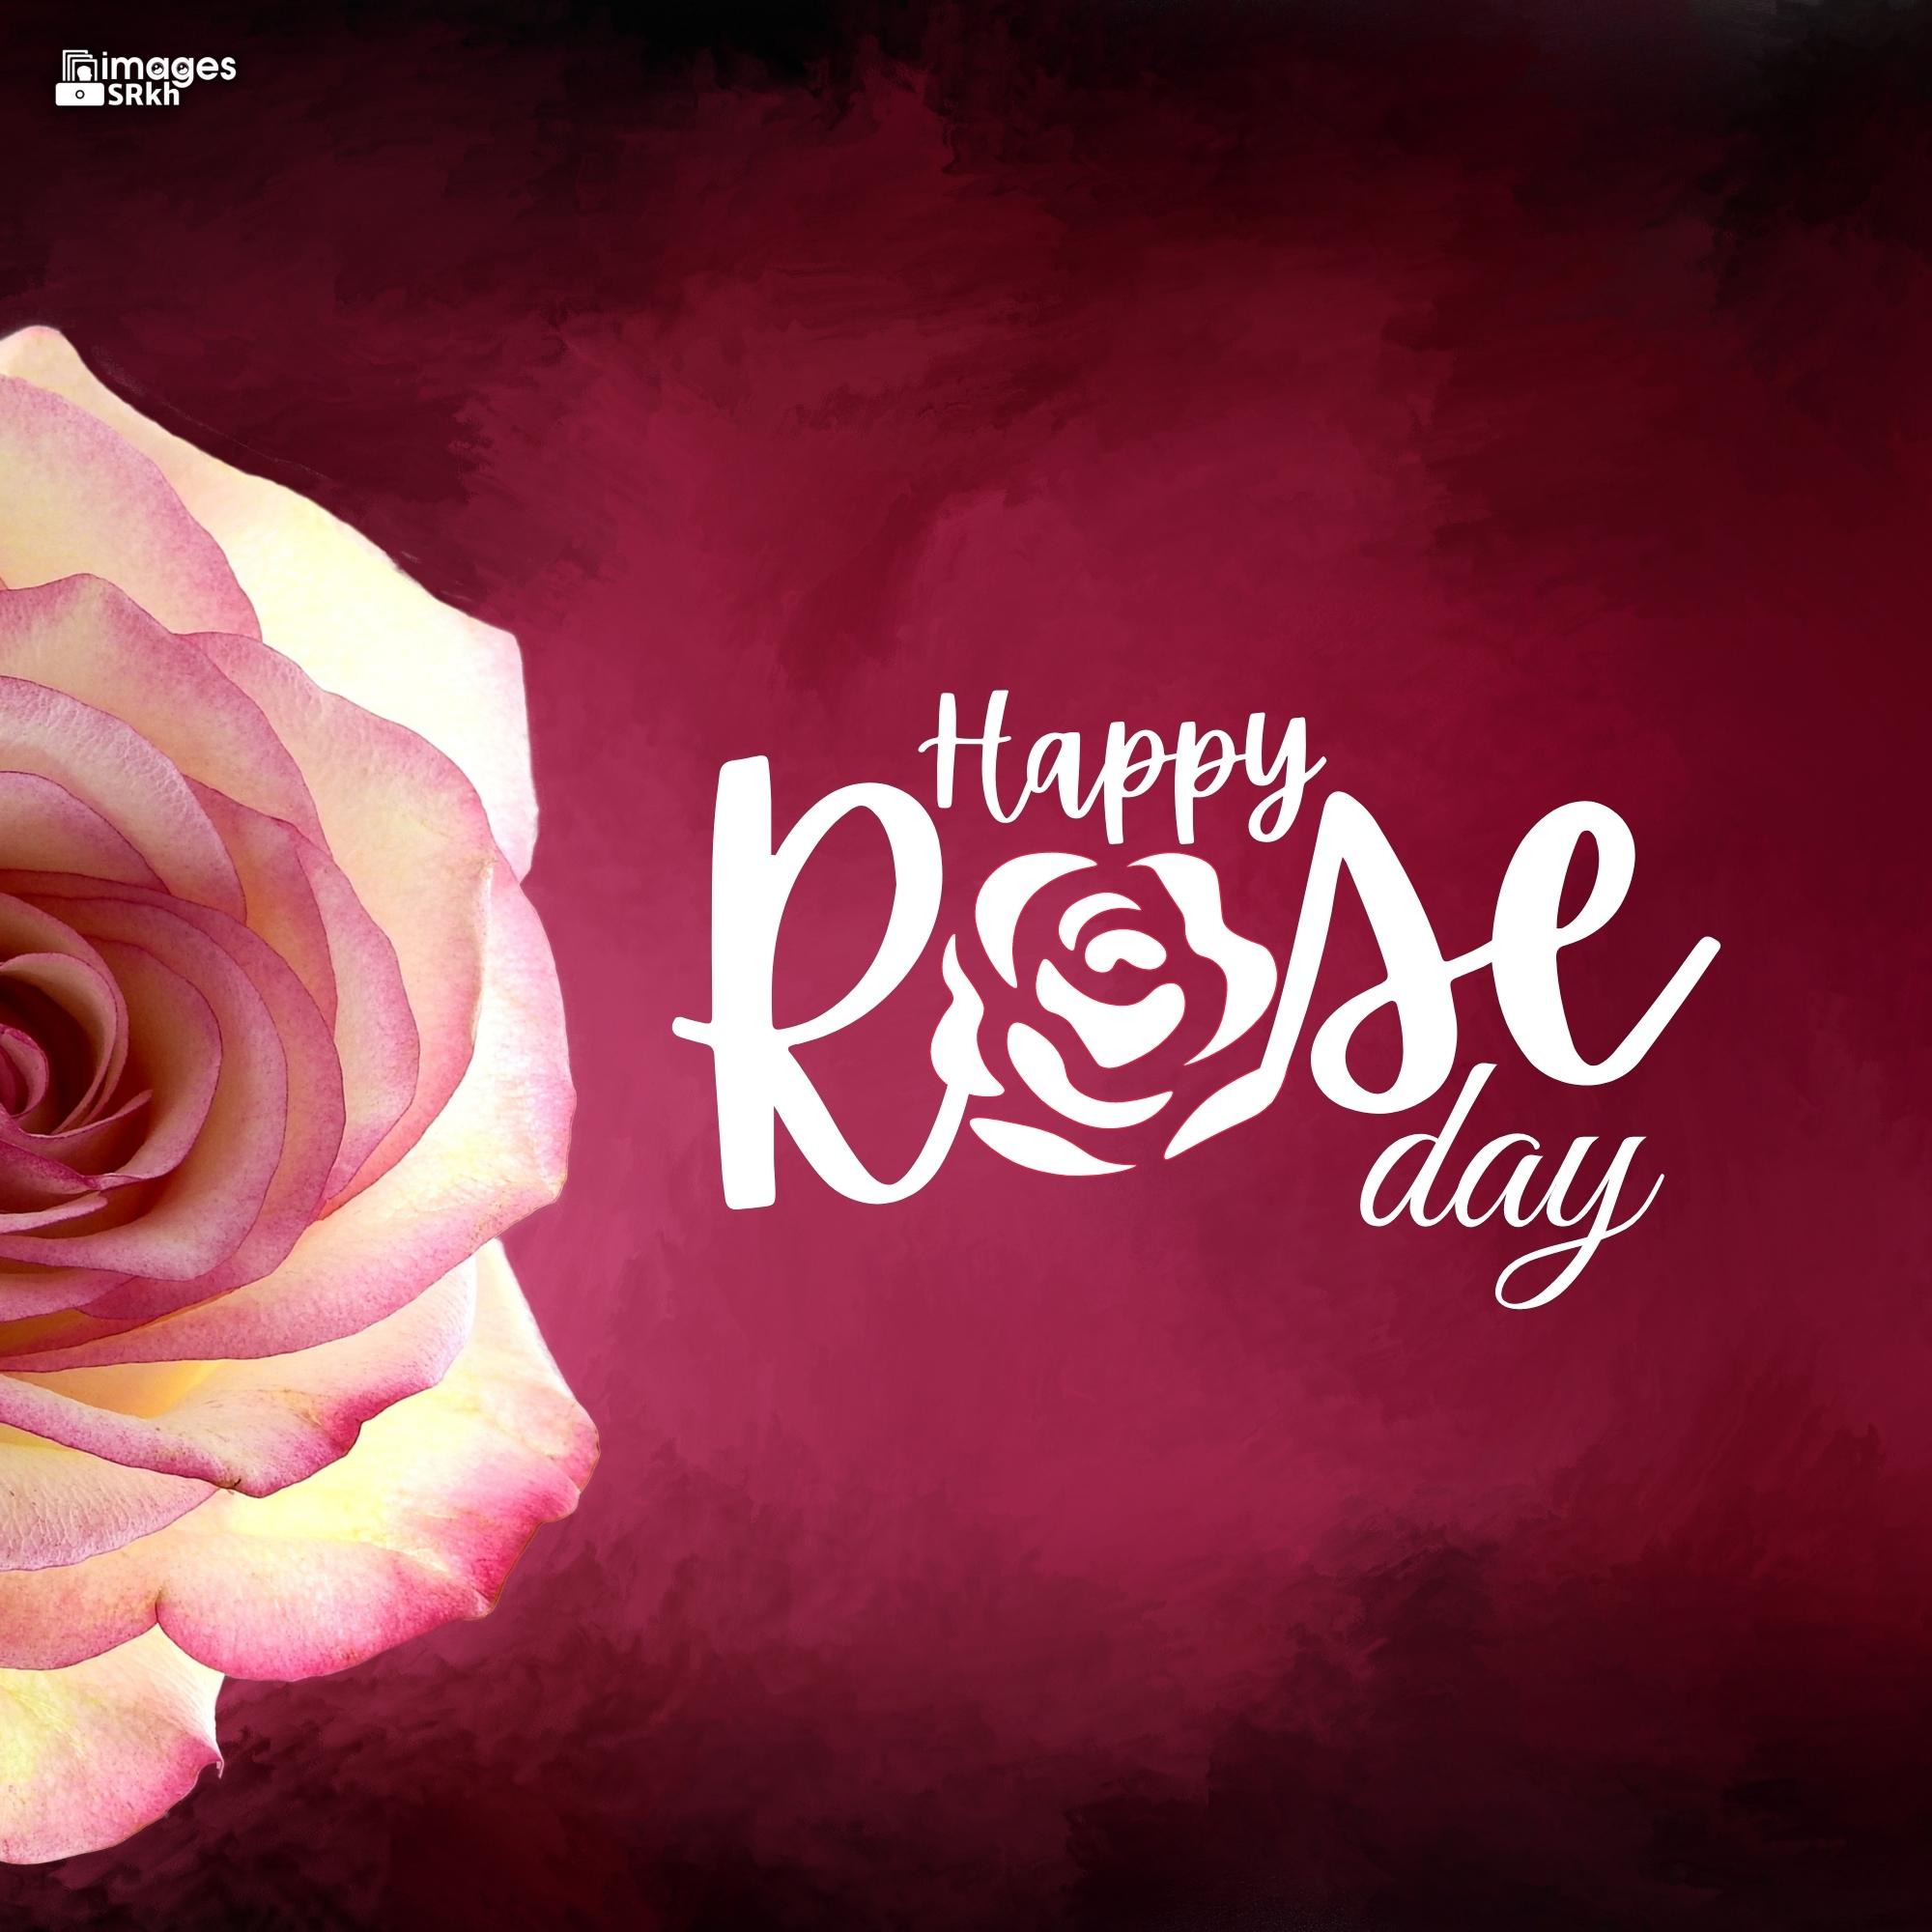 Happy Rose Day Image Hd Download (31)